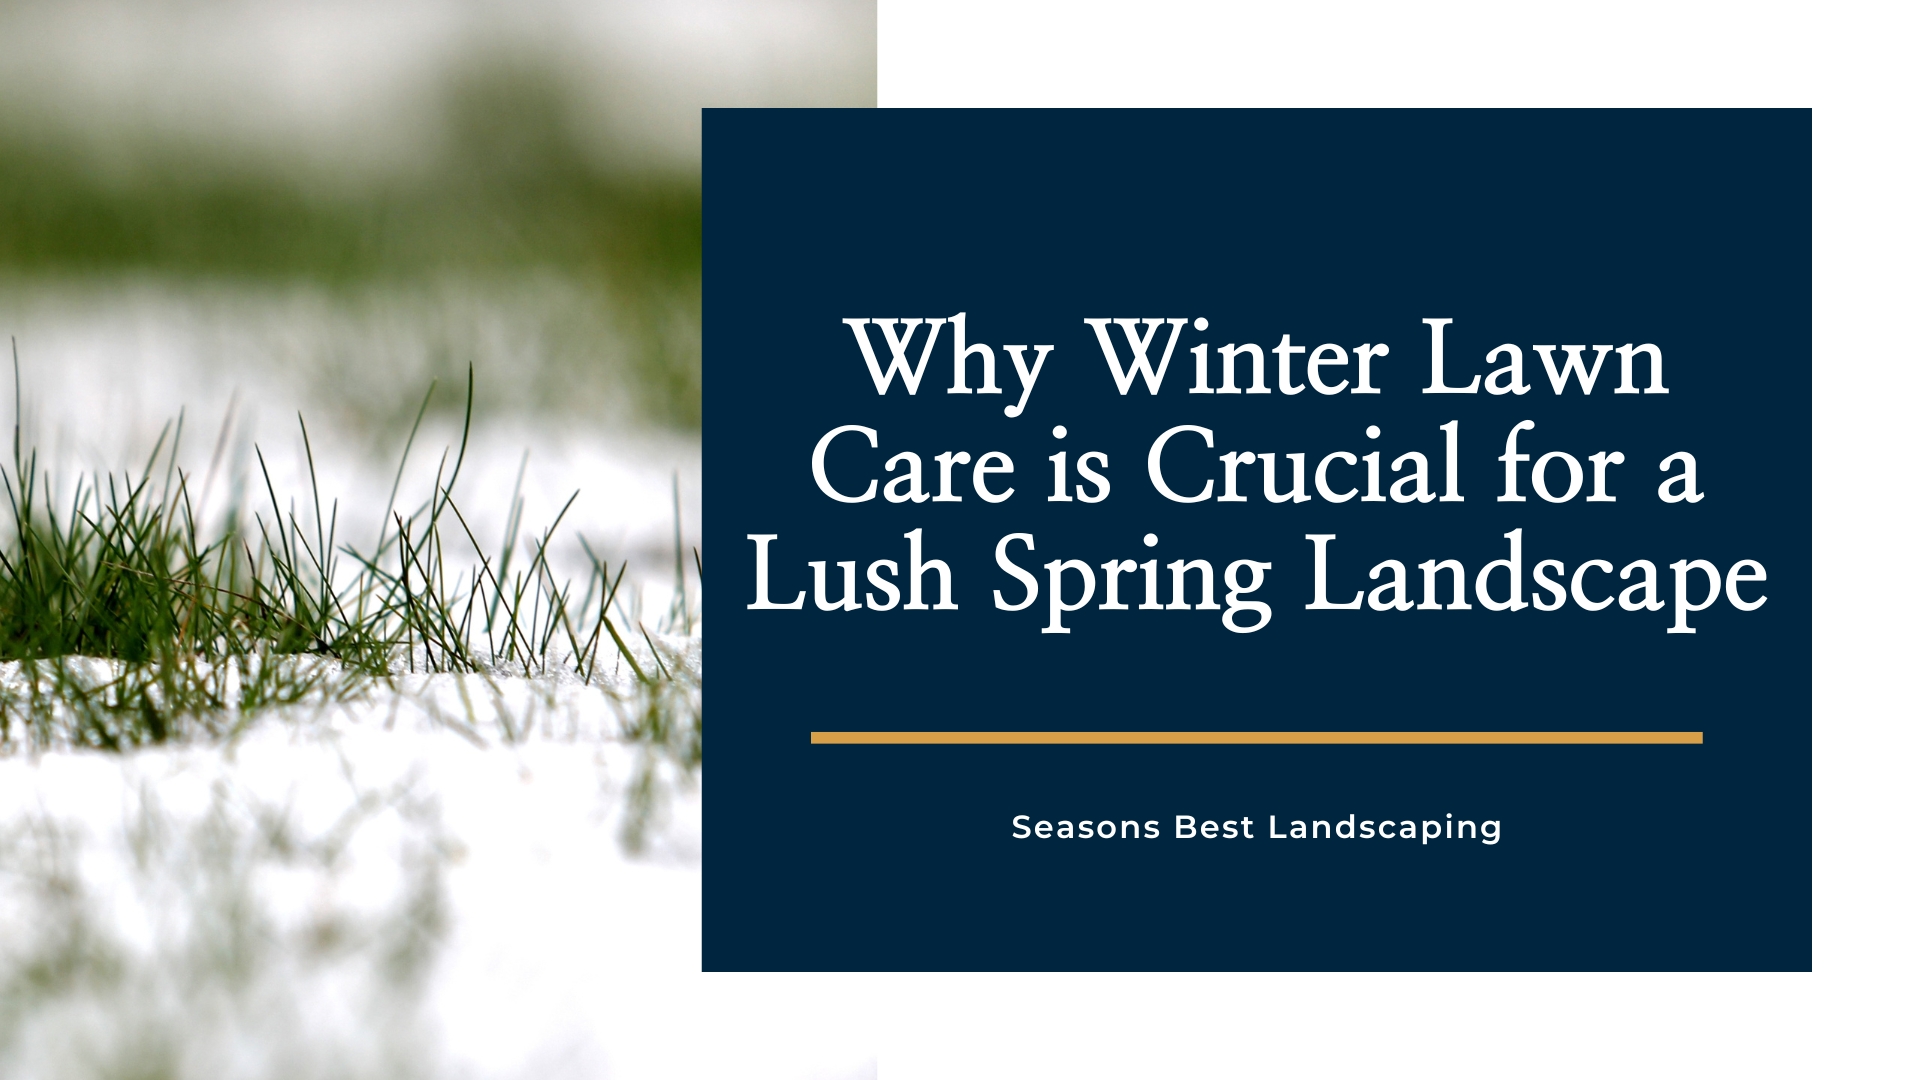 Lawn Care During Winter - Seasons Best Landscaping